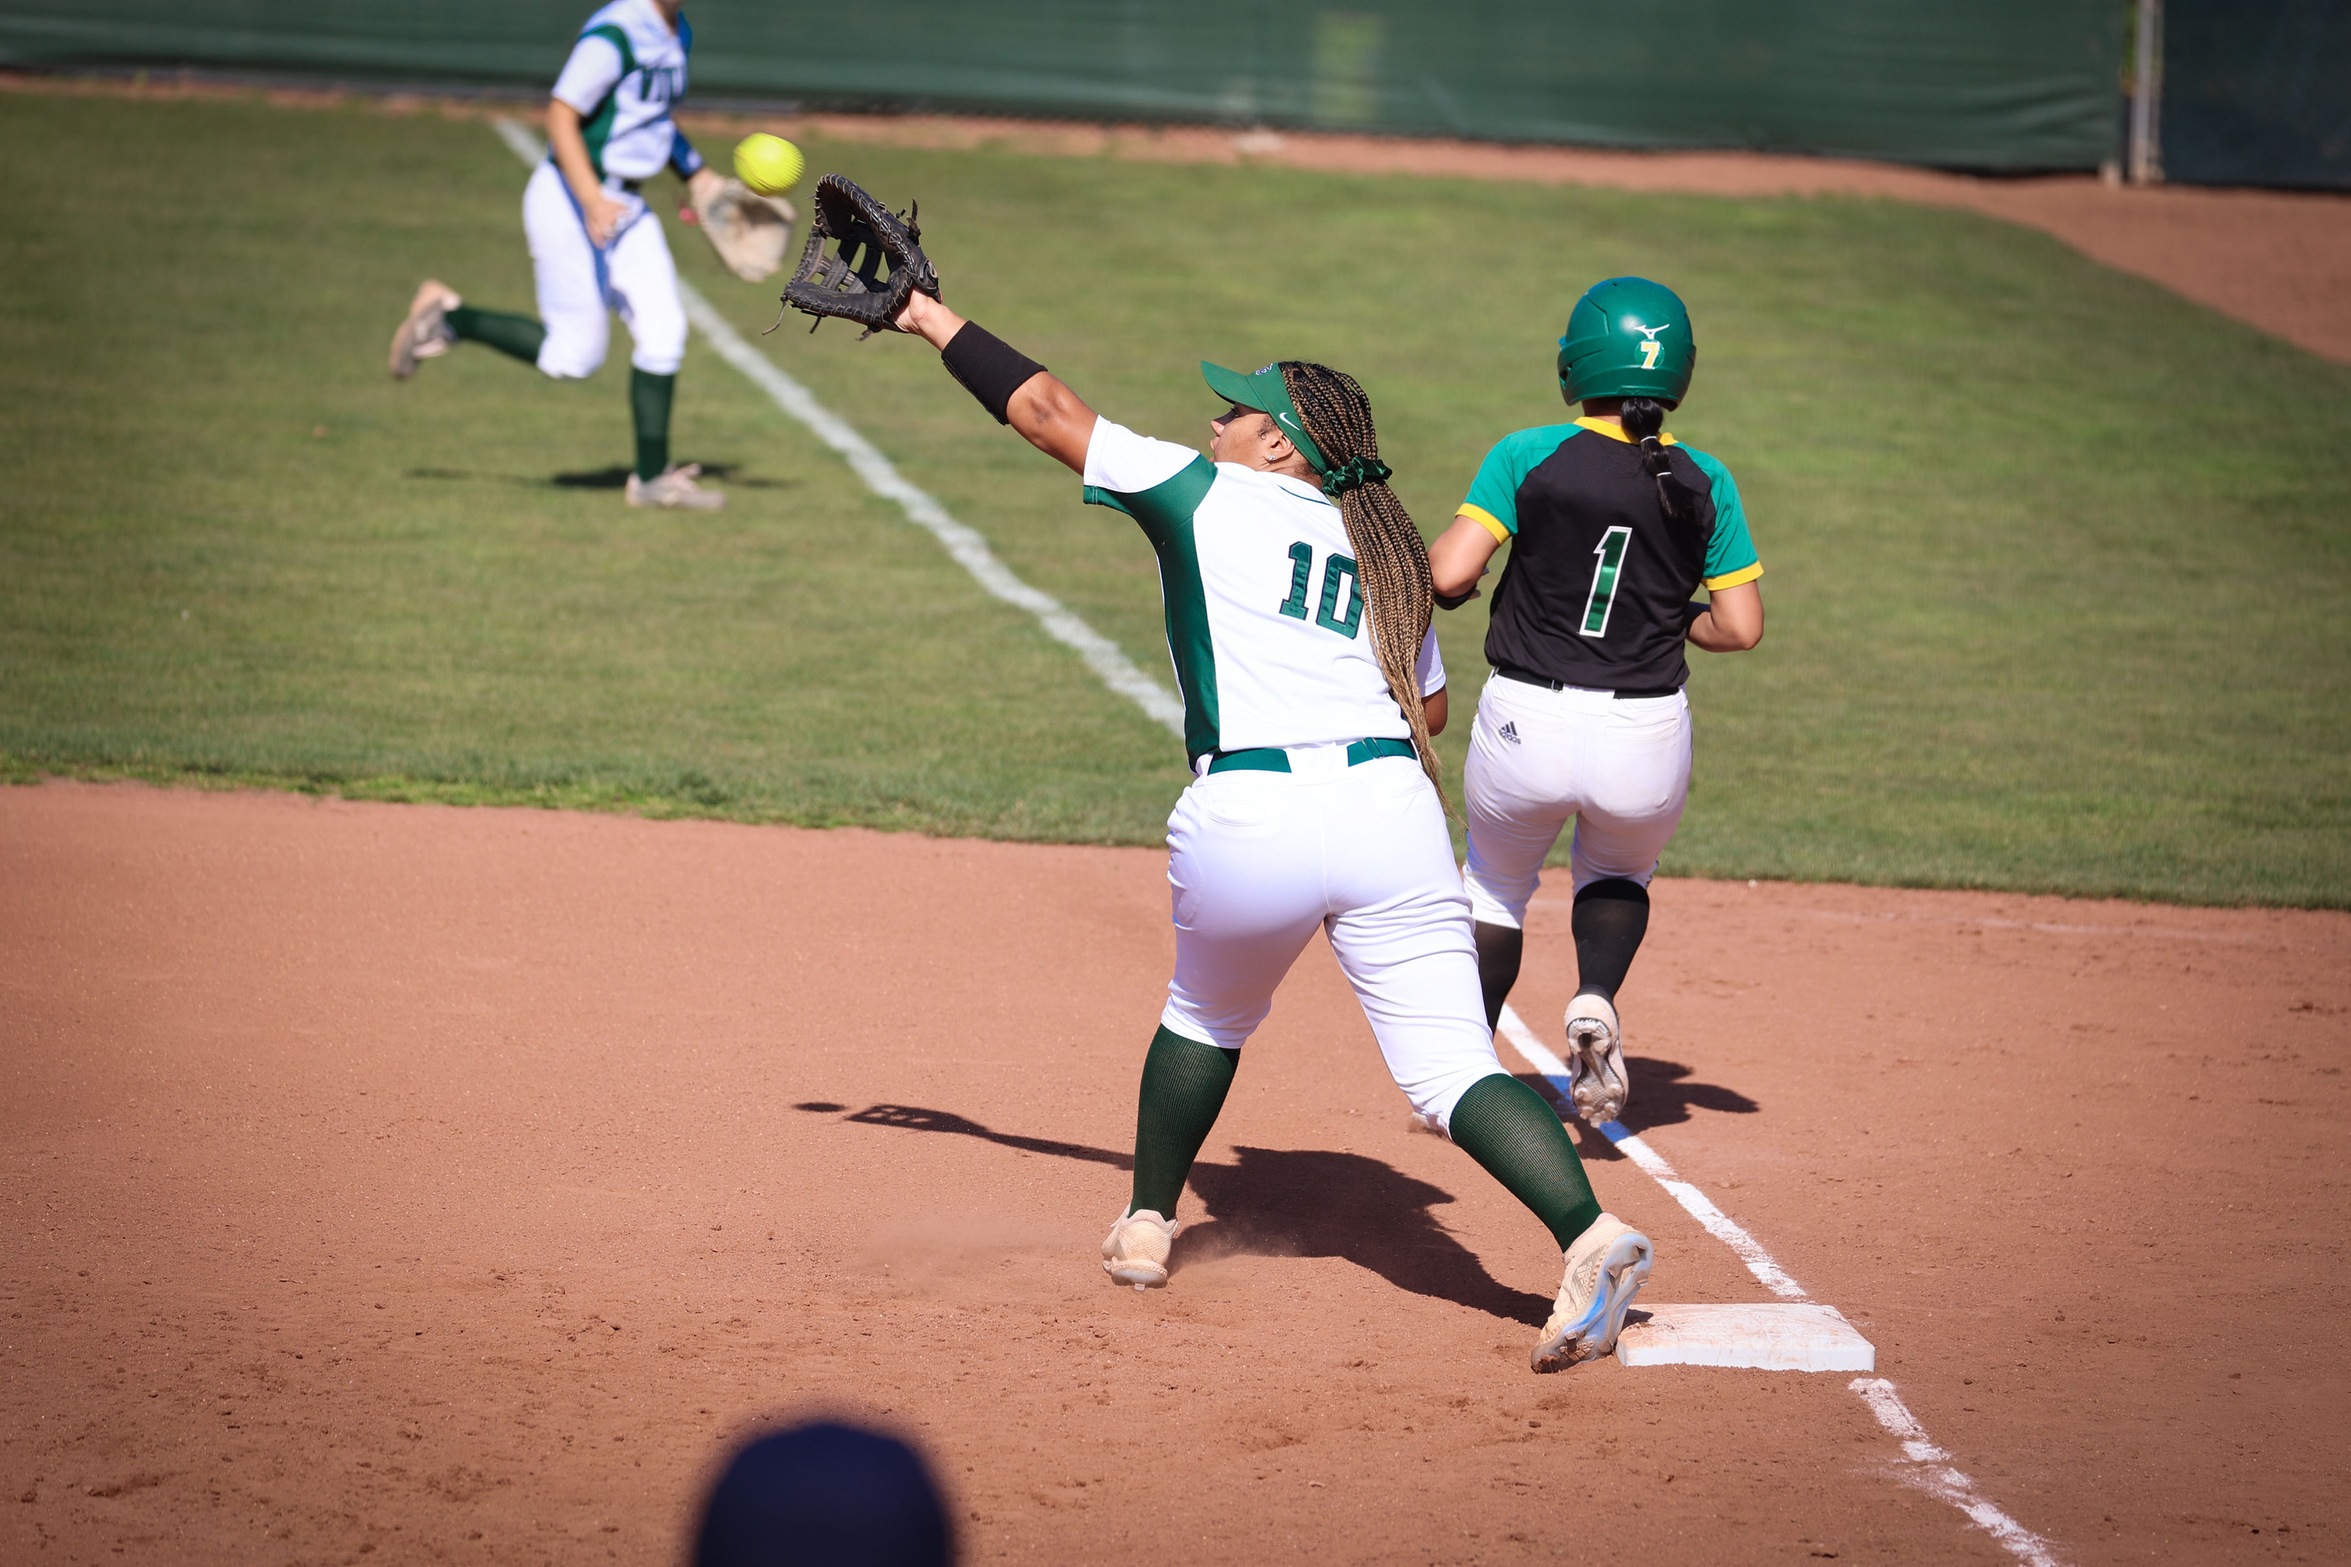 Softball drops first 5 game in a tough start to Big 8 conference play